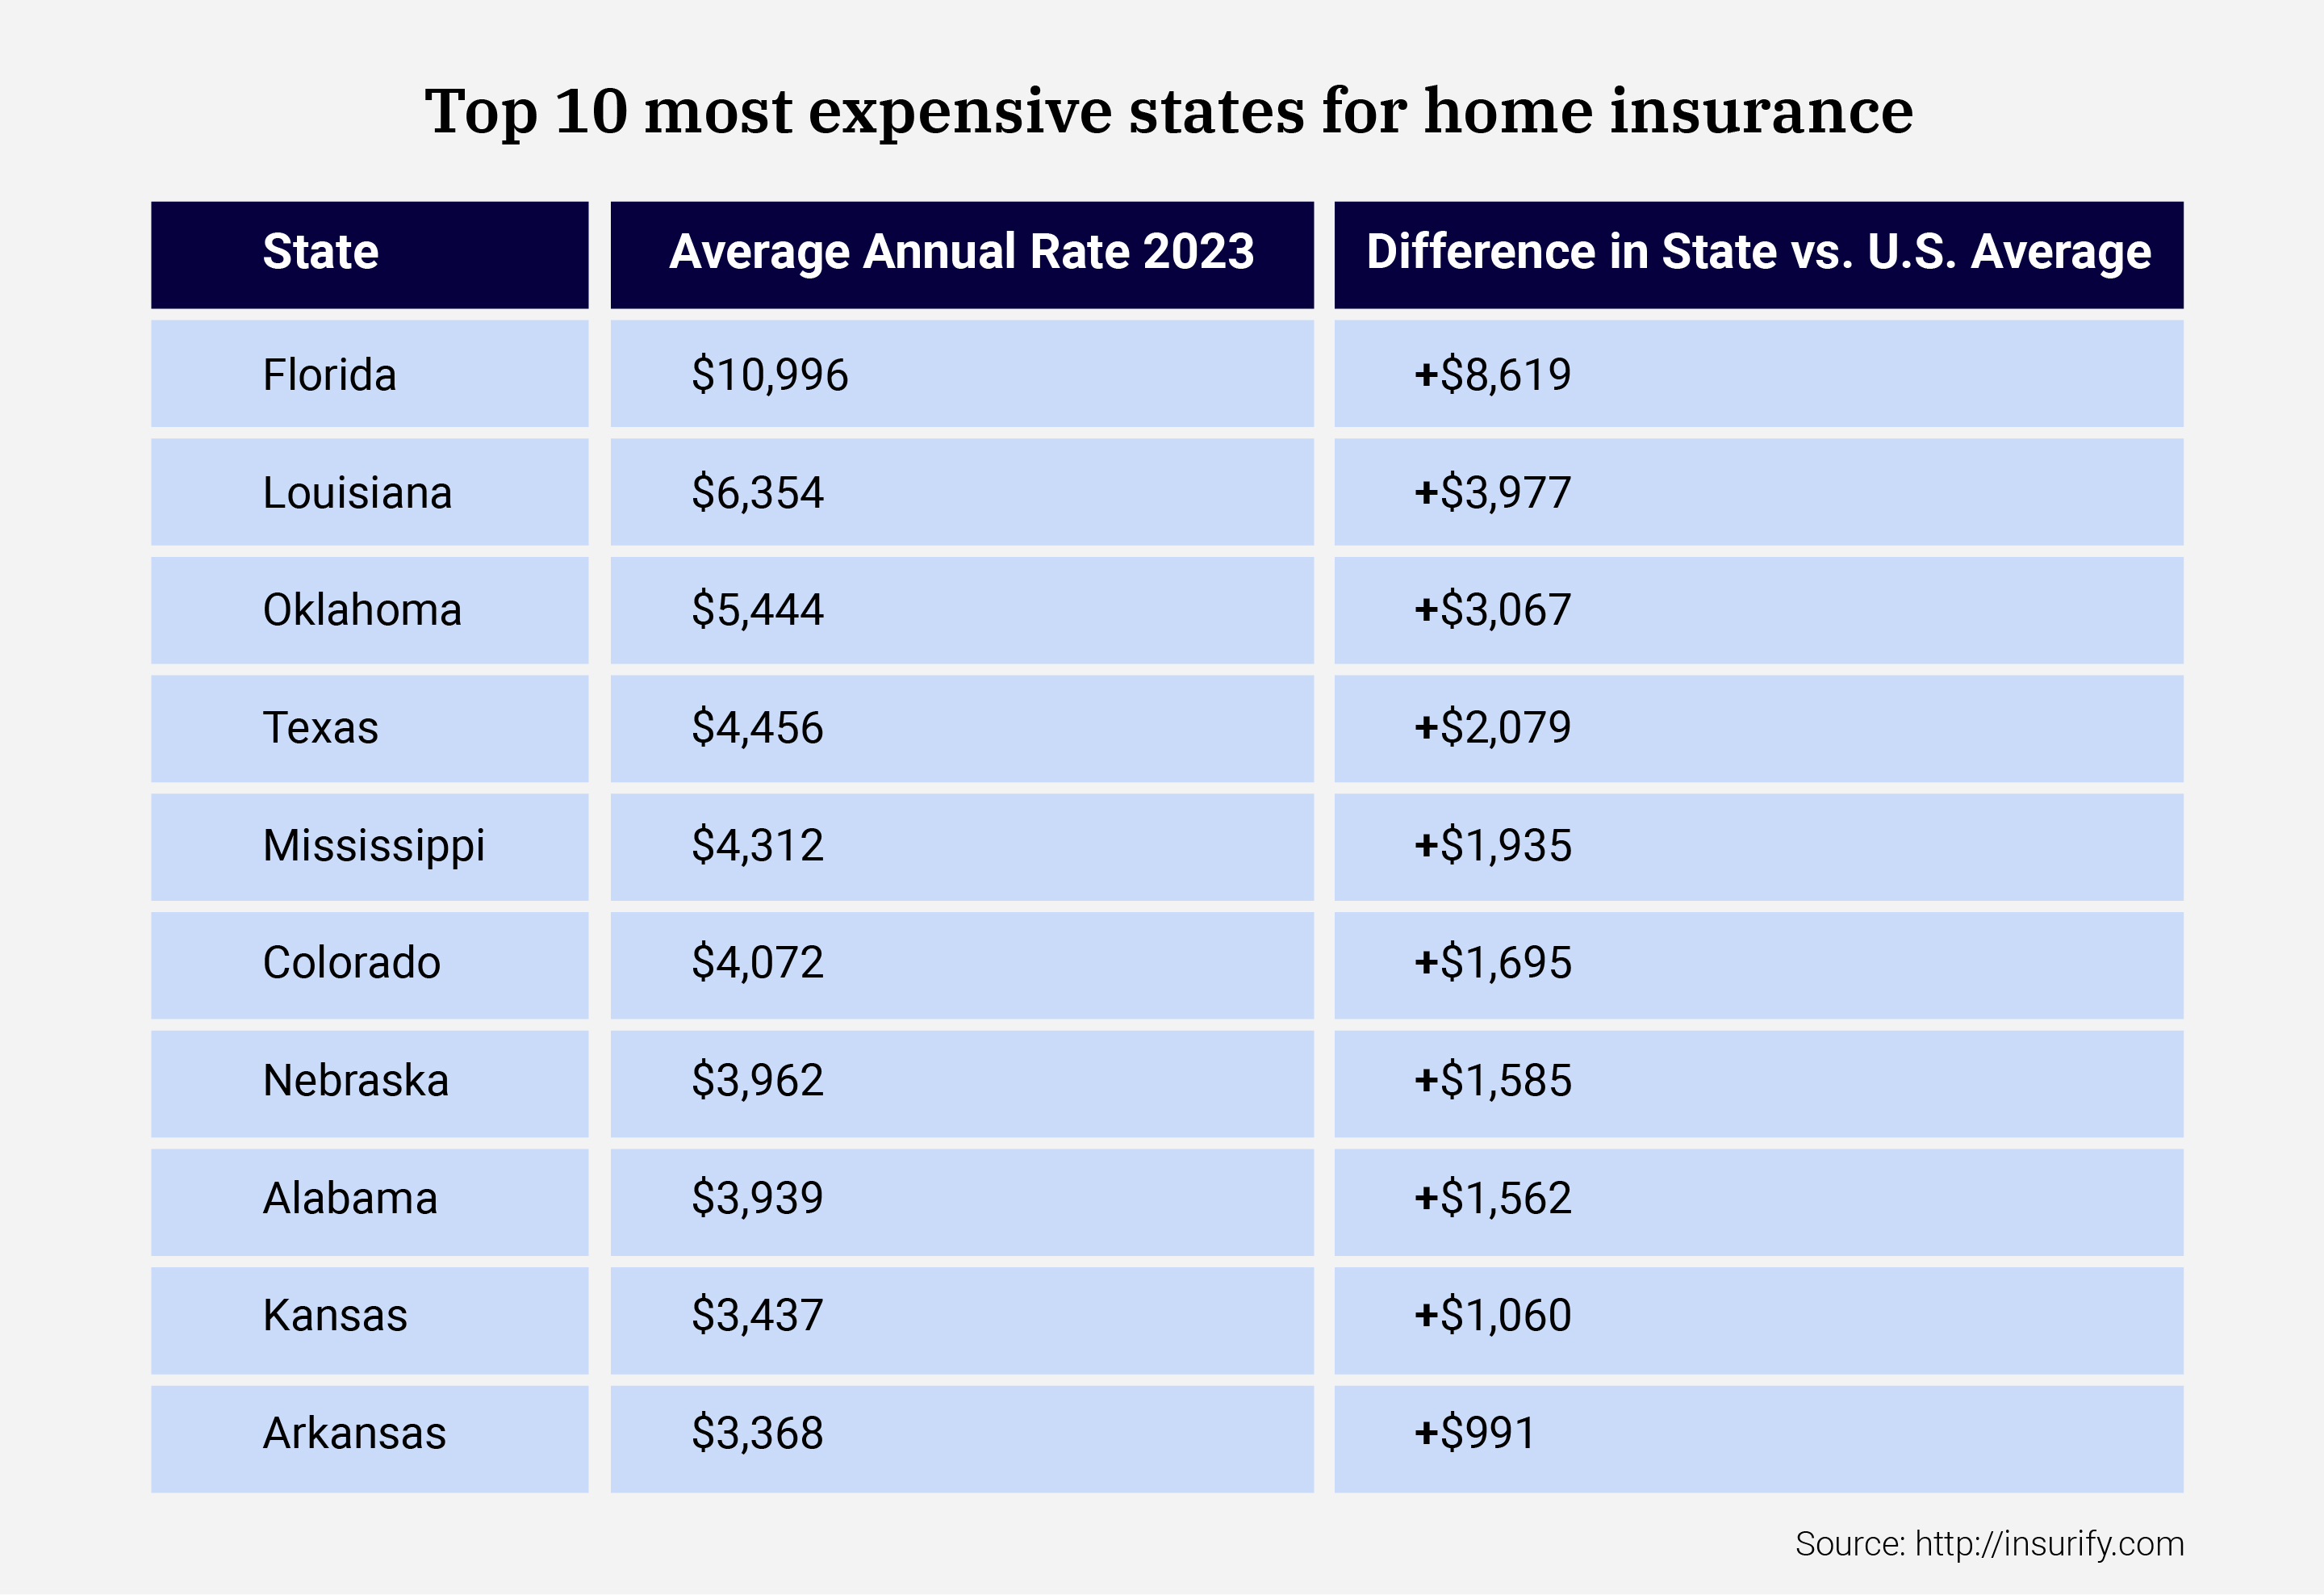 Top 10 expensive states for home insurance